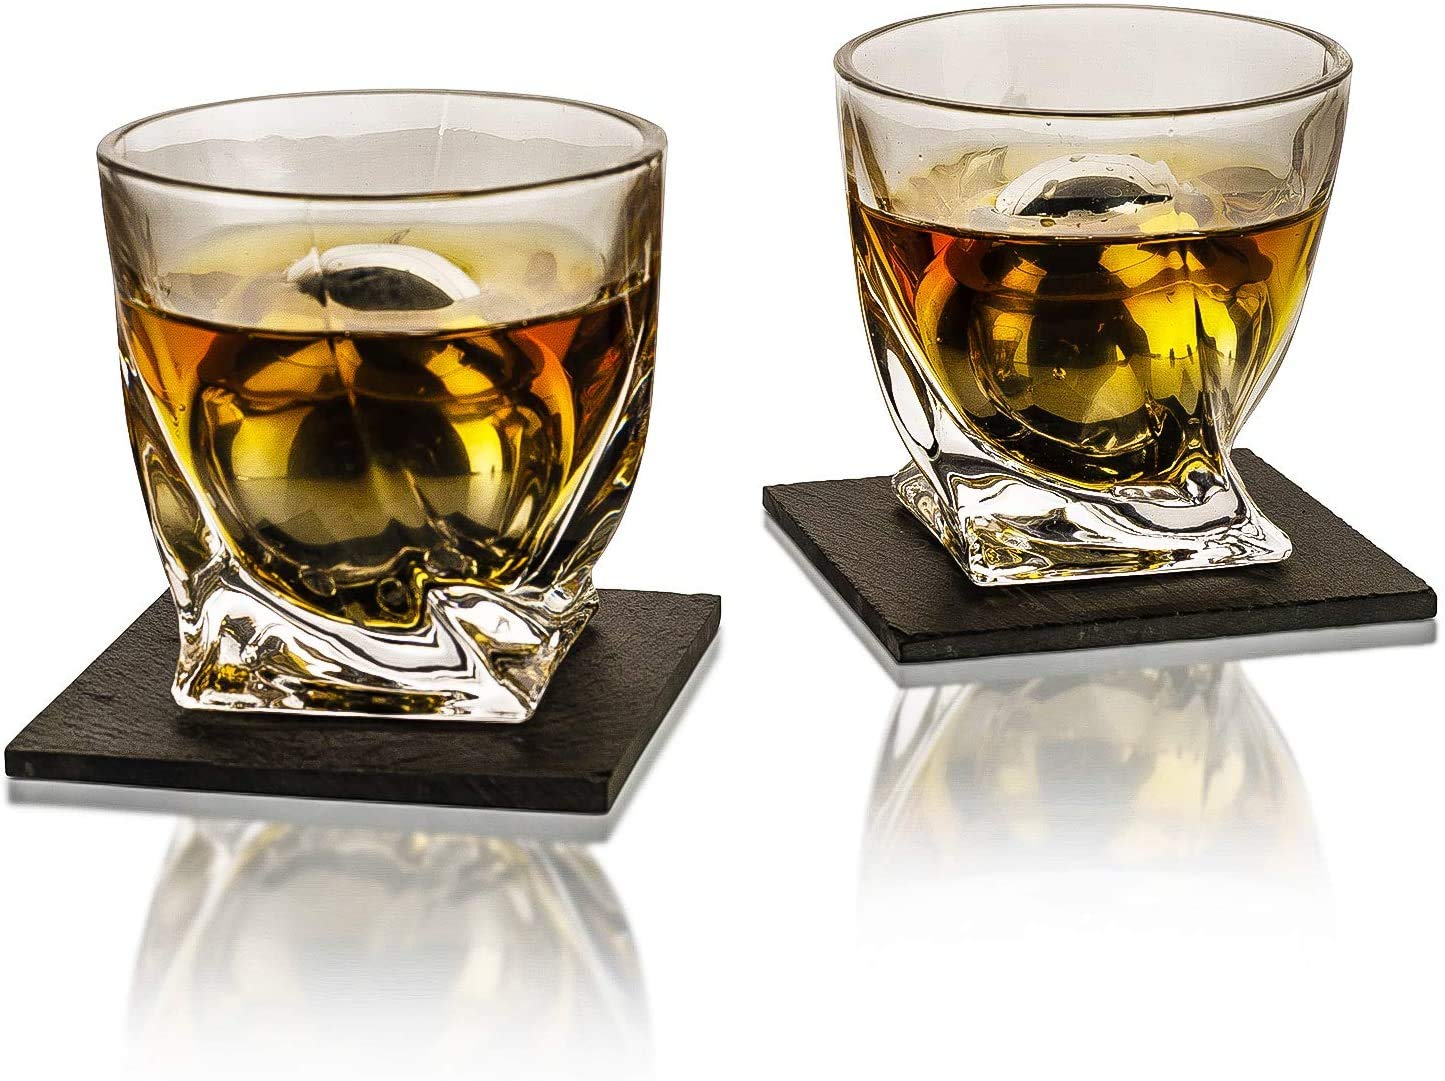 Whiskey Stones Gift Set - Whiskey Glass Set of - 2 King-Sized Chilling Stainless-Steel Whiskey Balls - Scotch Bourbon Box Set - Best Drinking Gifts - Men Dad Husband Birthday Party Present